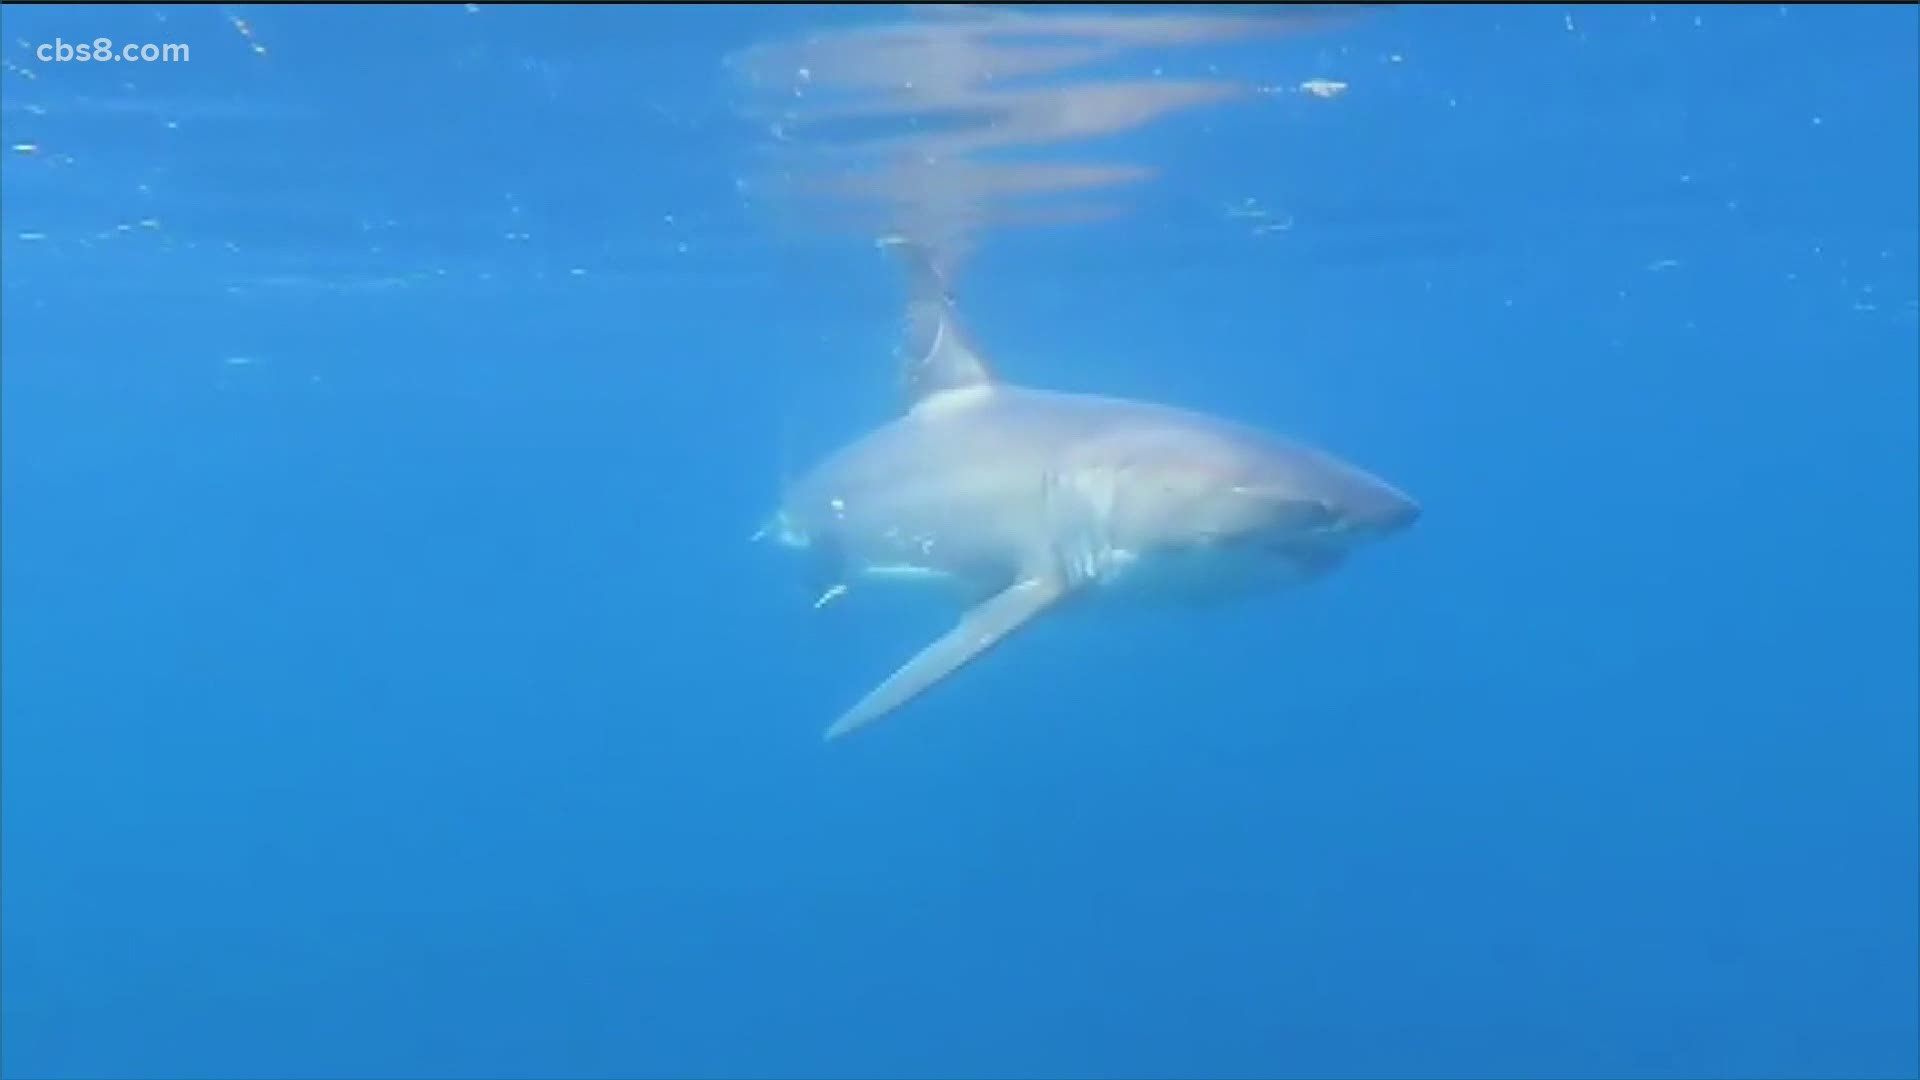 Shark experts are giving many reasons why we are seeing more this year including less people in the water during the pandemic and the unseasonably warmer weather.